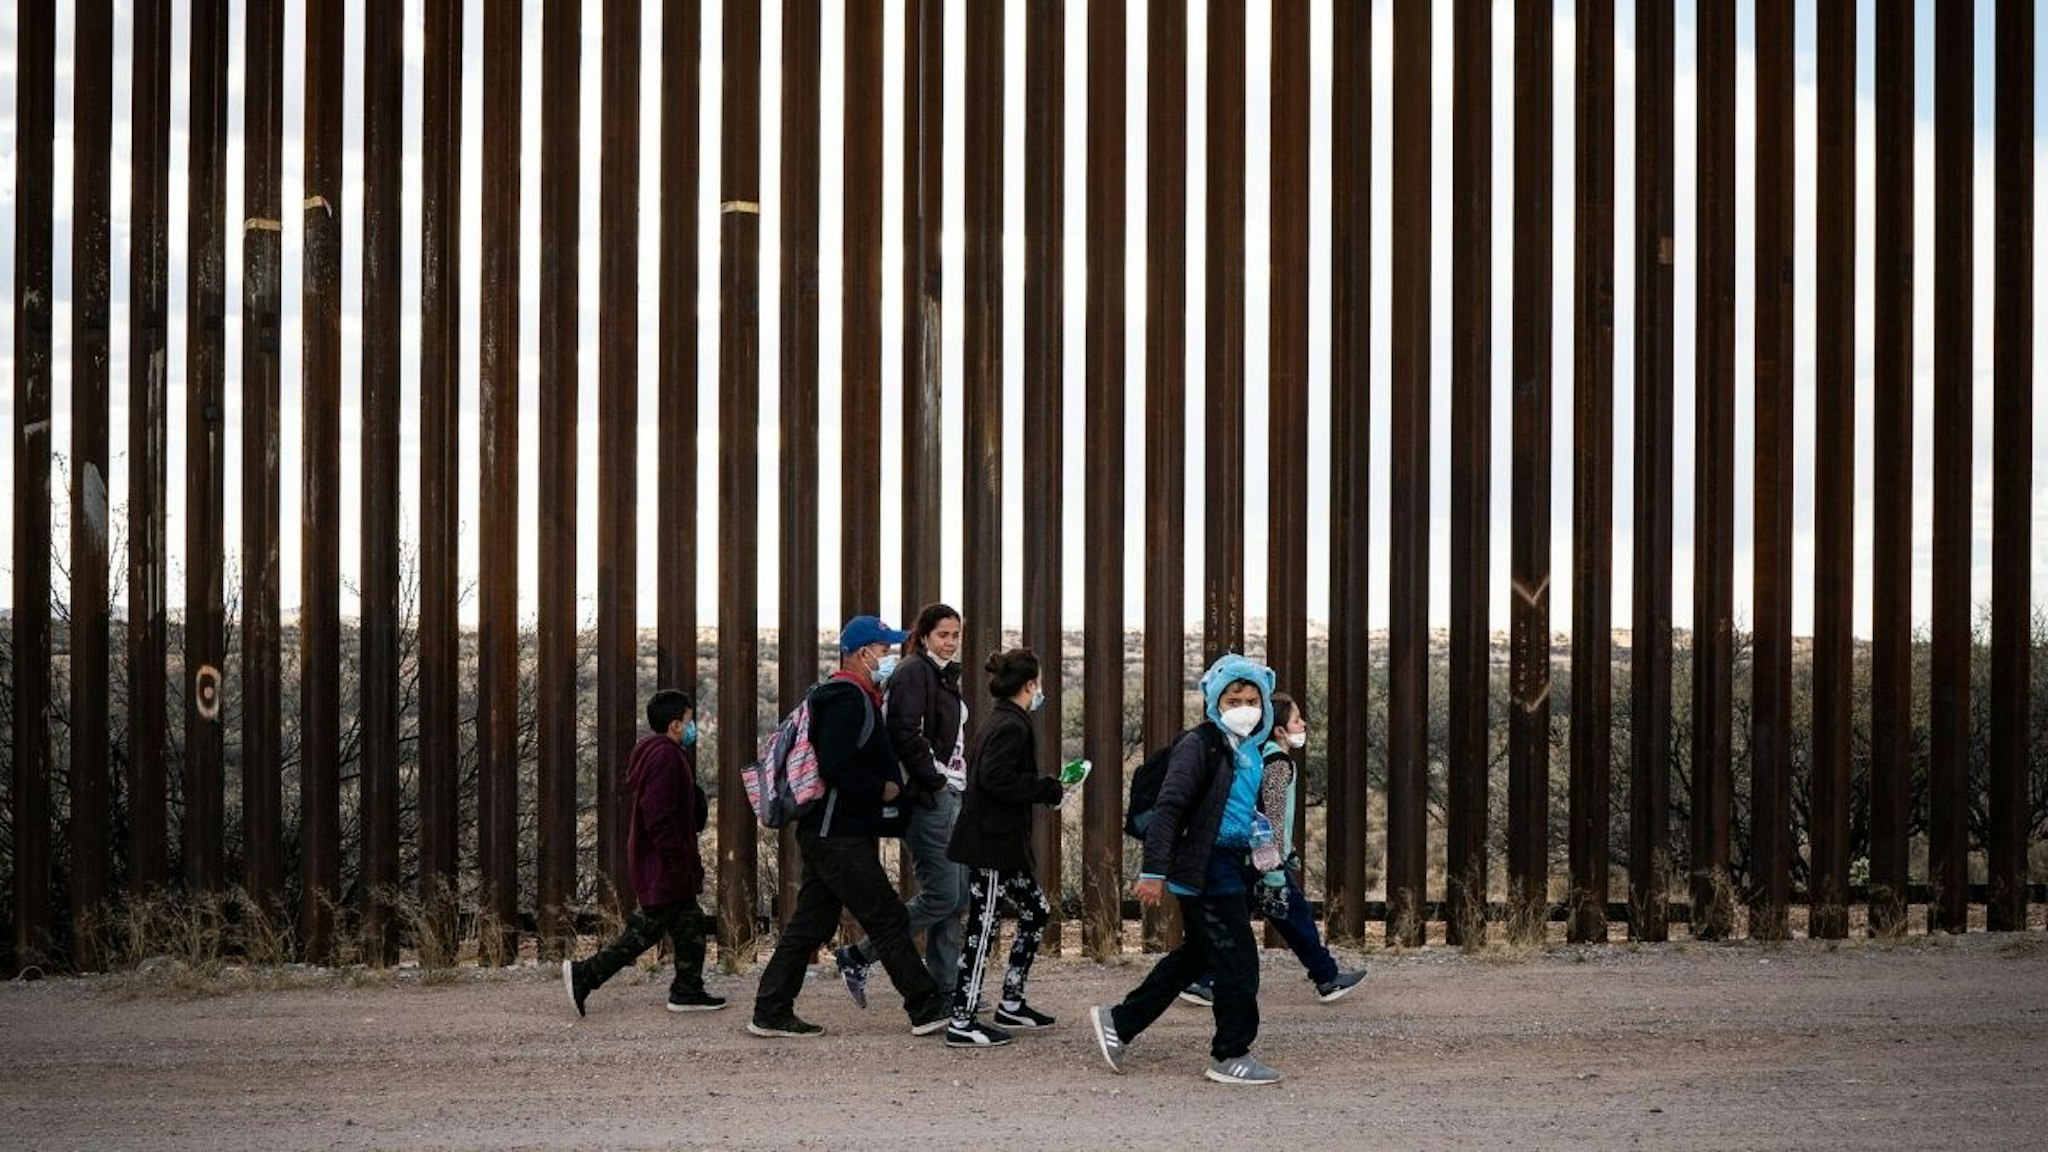 A group of migrant families from Central America walk along side the border wall between the U.S. and Mexico after crossing in to the U.S. near the city of Sasabe, Arizona, Sunday, January 23, 2022.